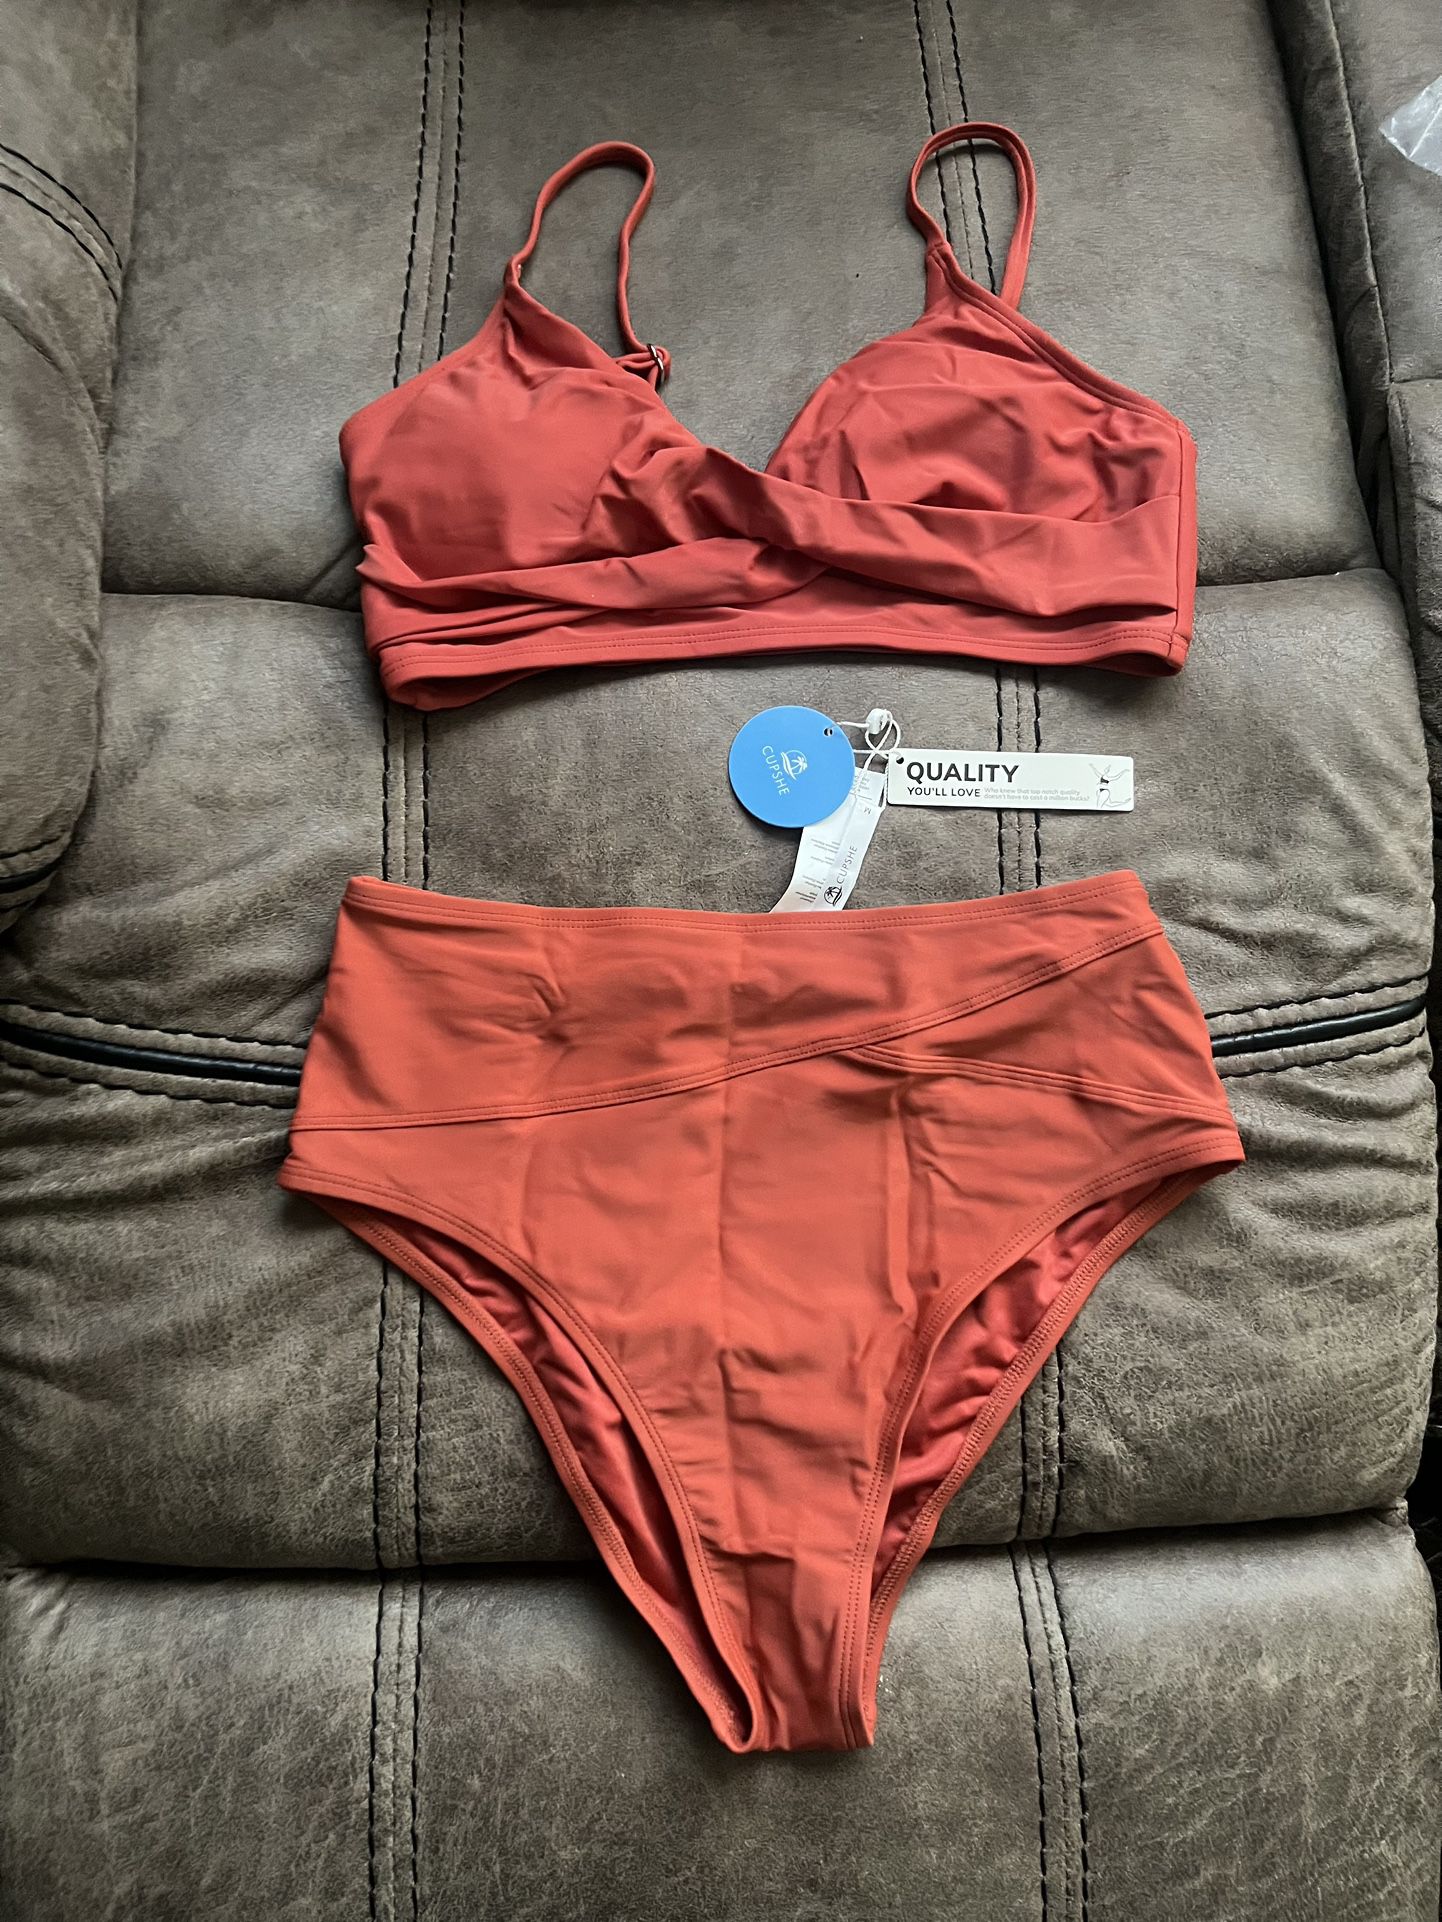 Dior Bathing Suit Size Big Authentic for Sale in Dallas, TX - OfferUp